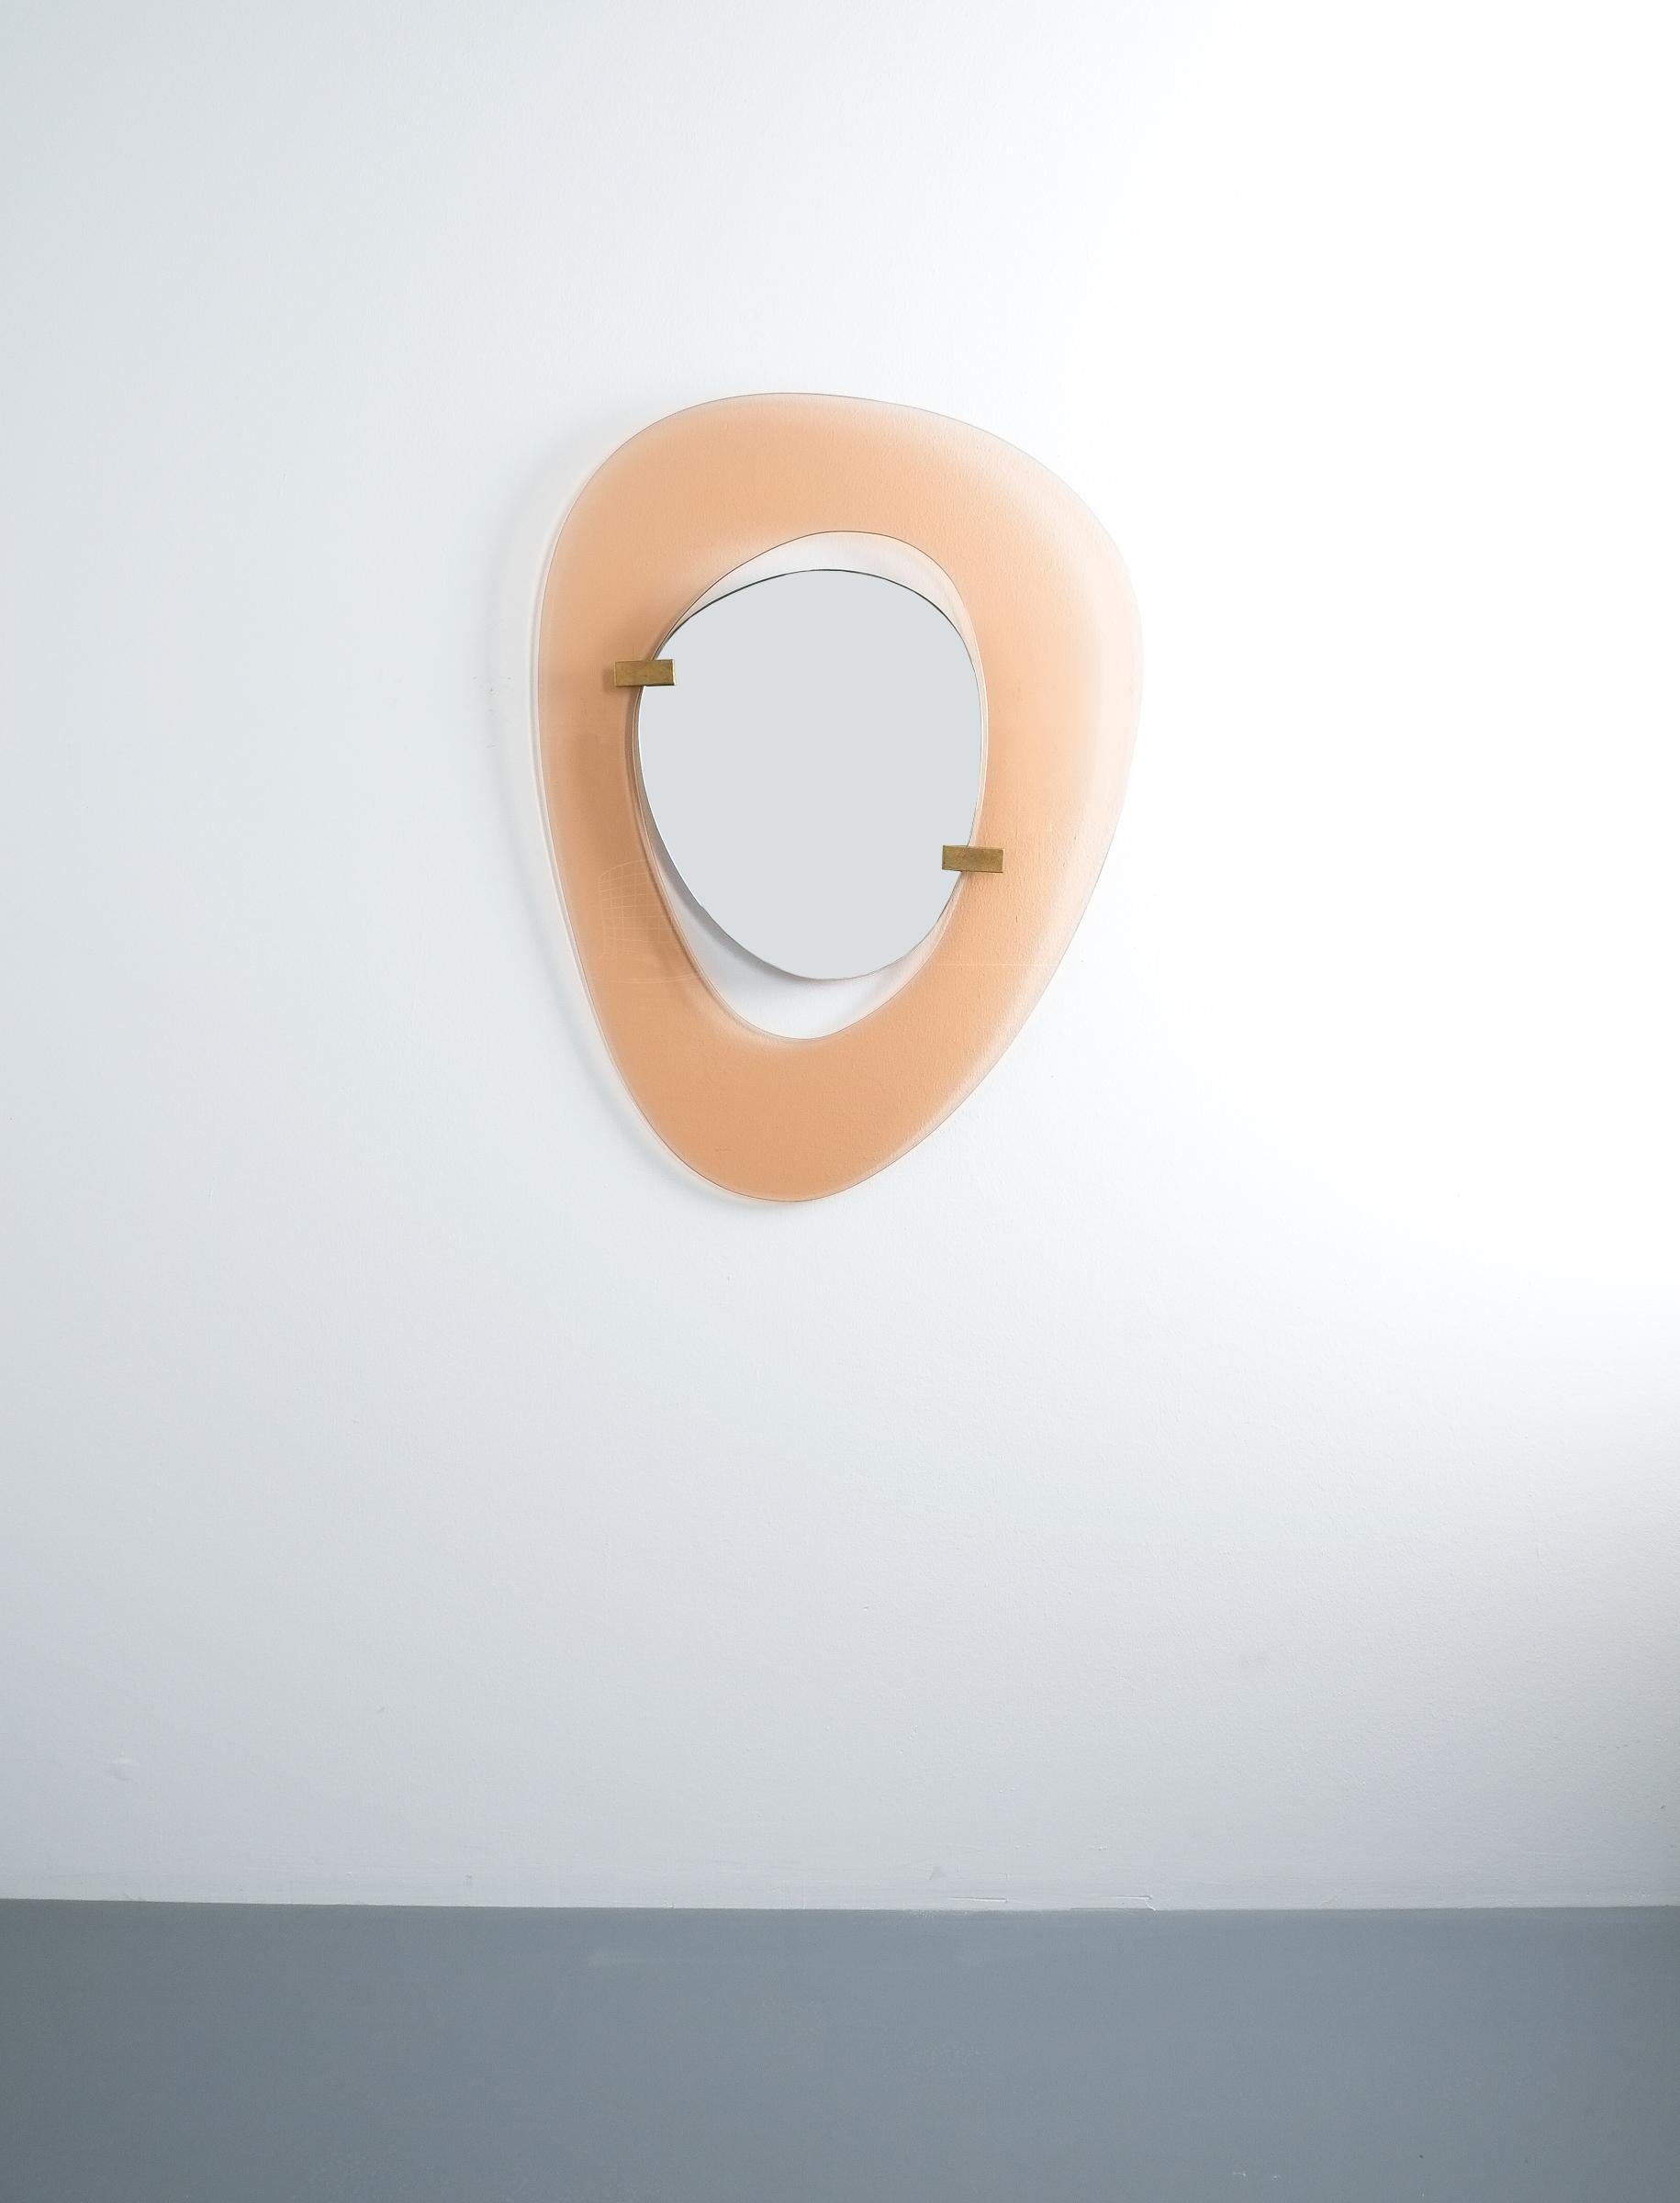 Fontana Arte mirror by Max Ingrand, Italy, circa 1958. Beautiful mirror with an anomic orange/apricot smooth glass frame and anomic floating mirror attached with two brass clasps.
Measurements are 23.6